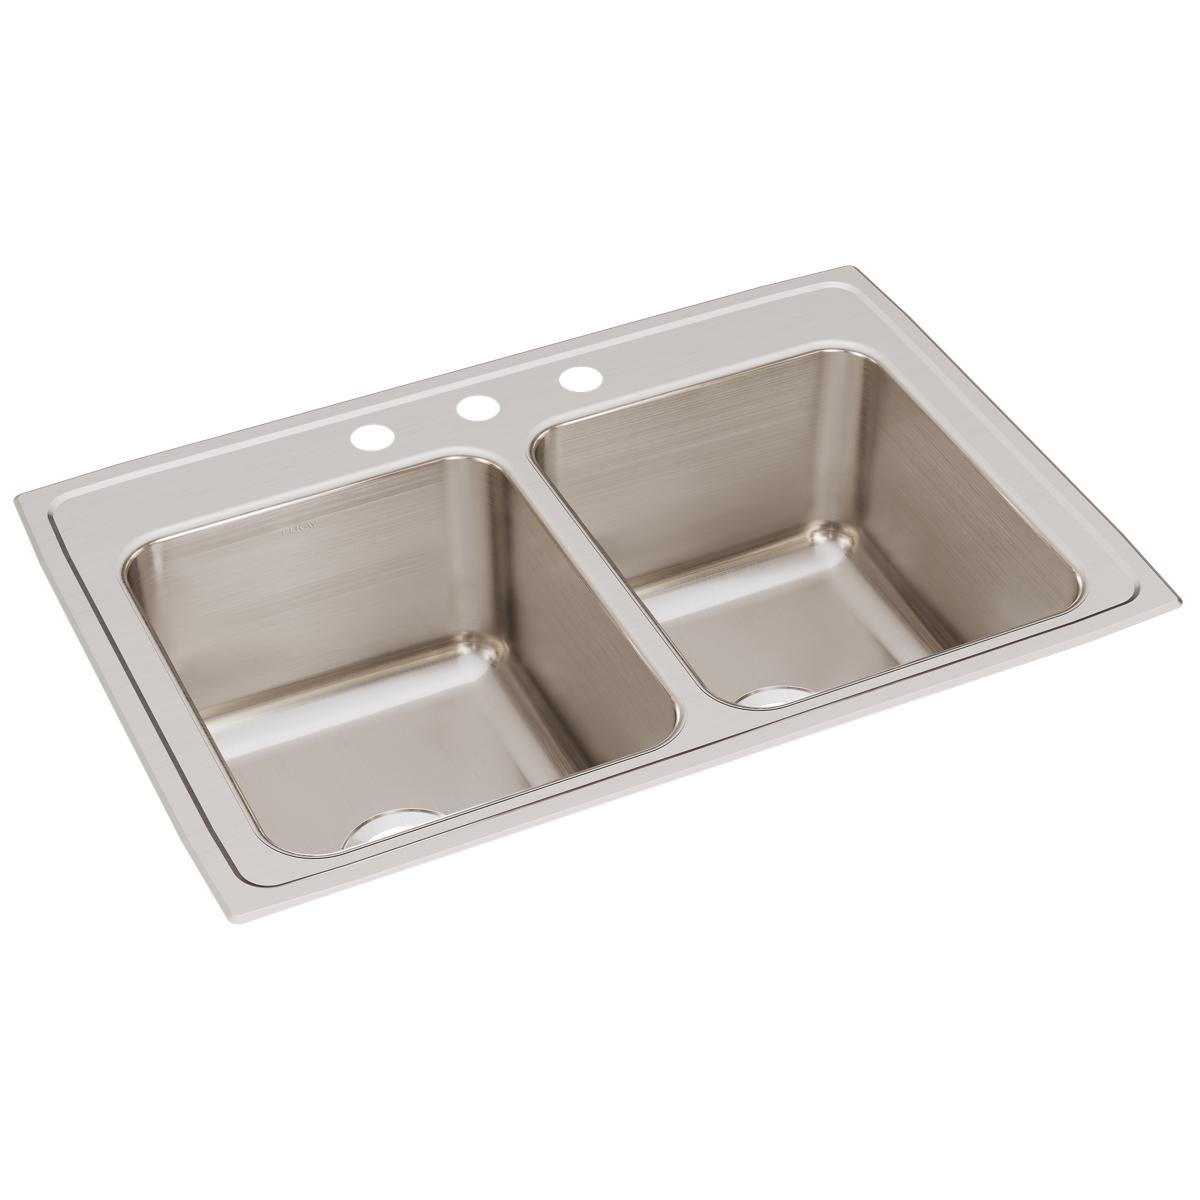 Elkay Lustertone Classic Stainless Steel 33" x 22" x 12-1/8" Equal Double Bowl Drop-in Sink